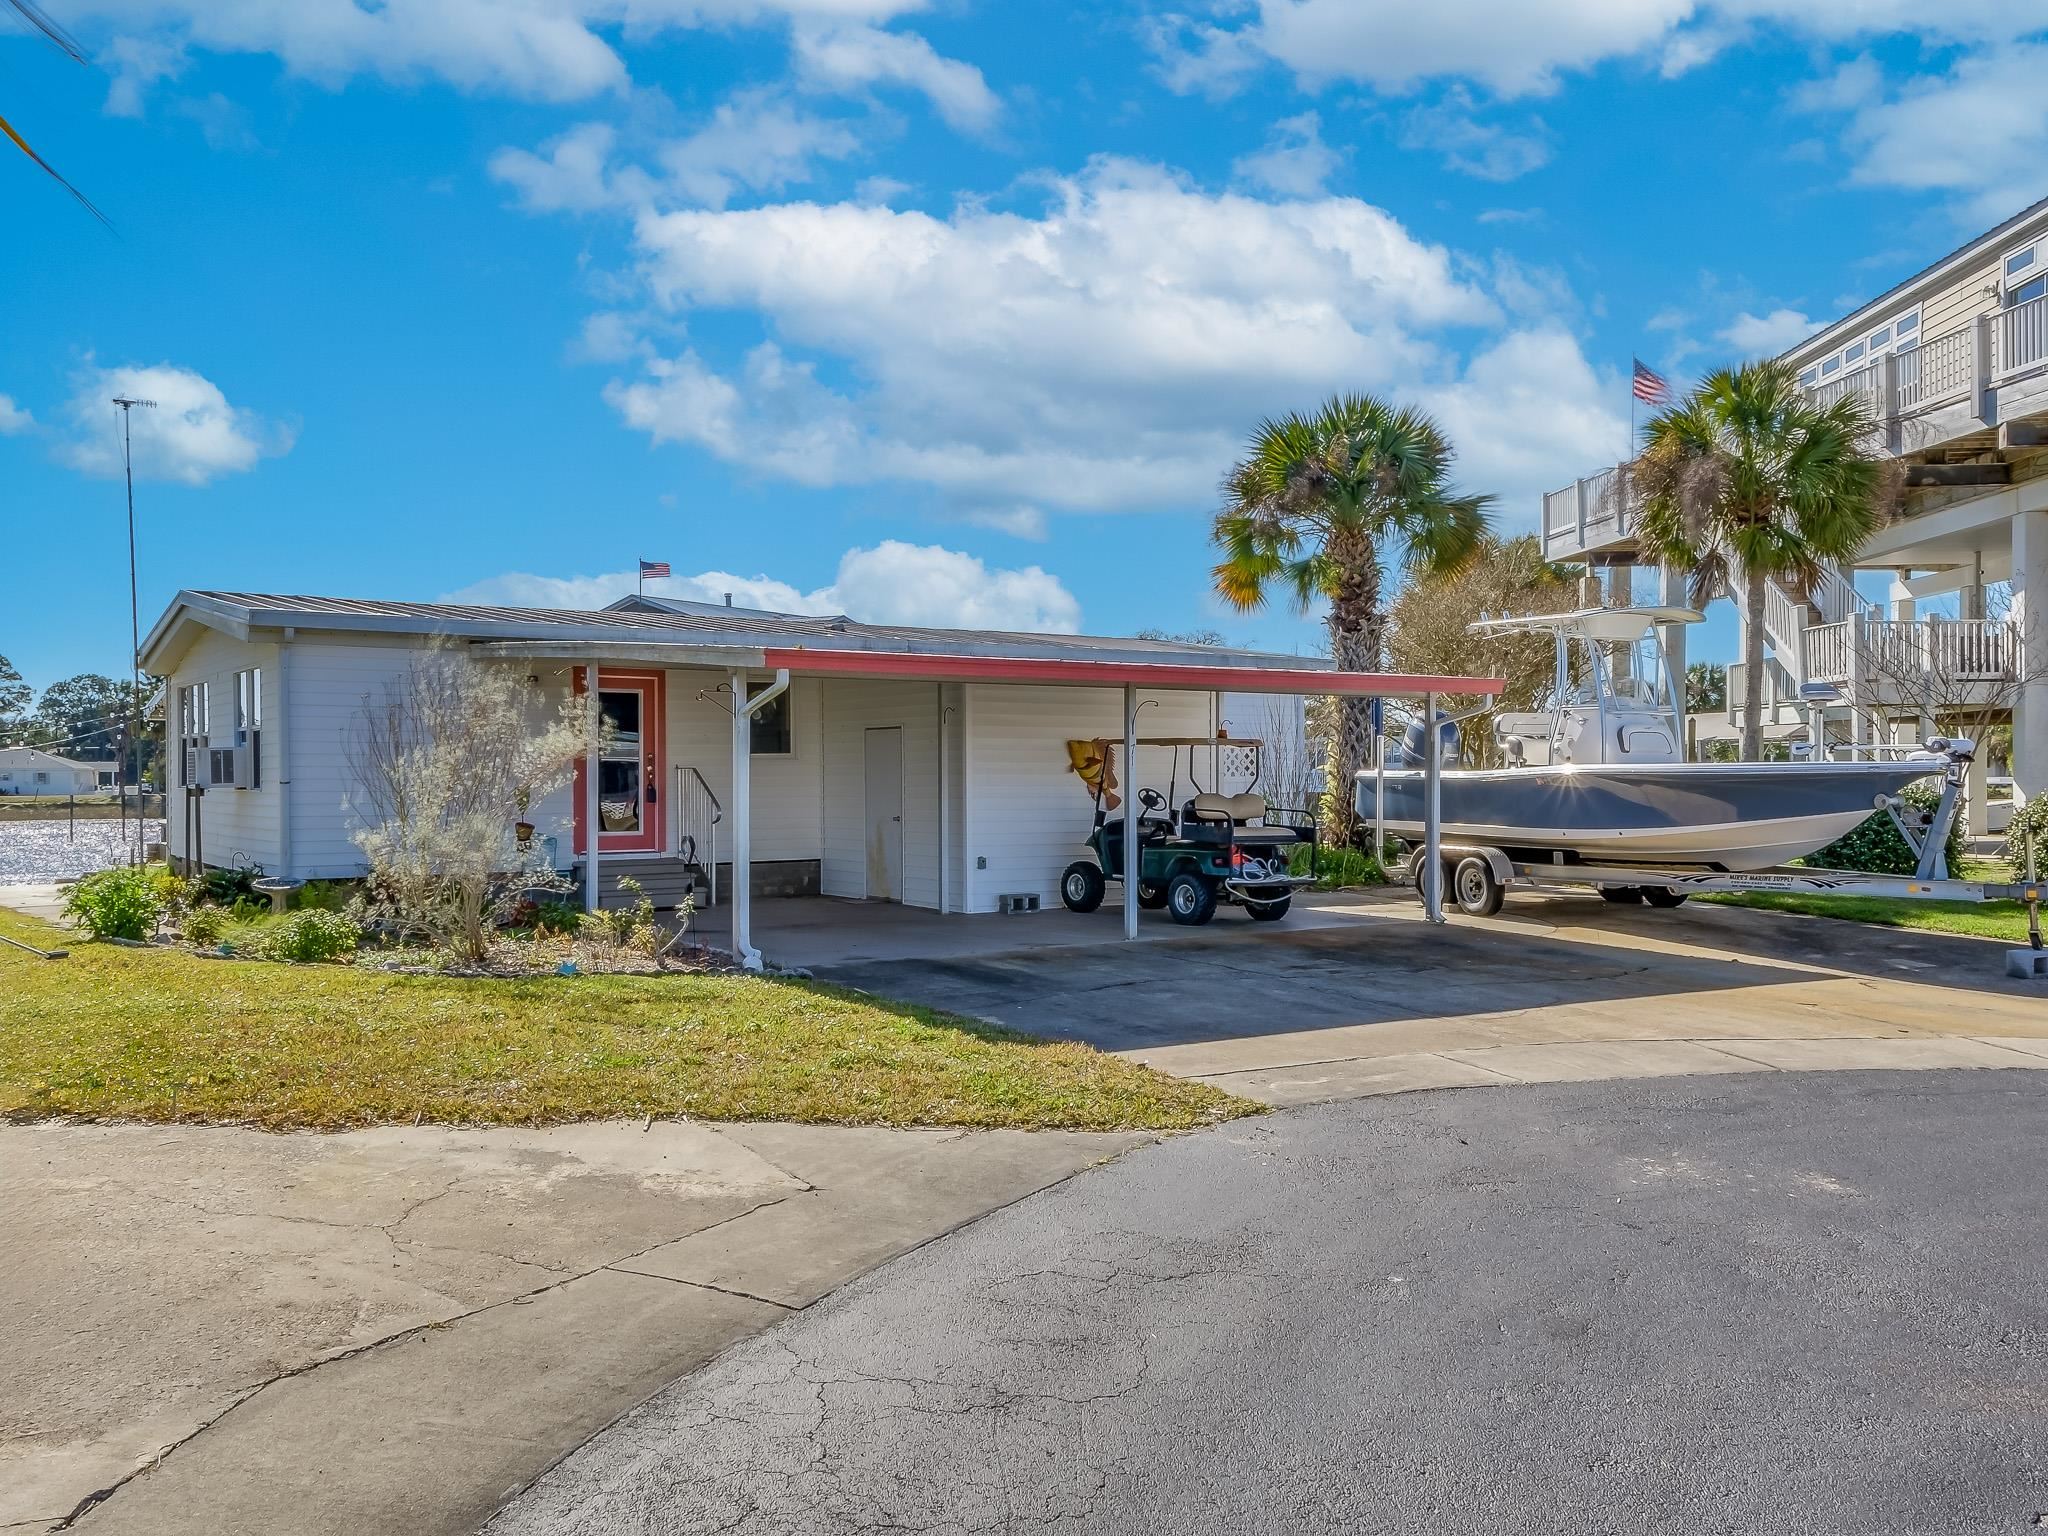 71 CONNIE Drive,CRAWFORDVILLE,Florida 32327,3 Bedrooms Bedrooms,2 BathroomsBathrooms,Manuf/mobile home,71 CONNIE Drive,367168